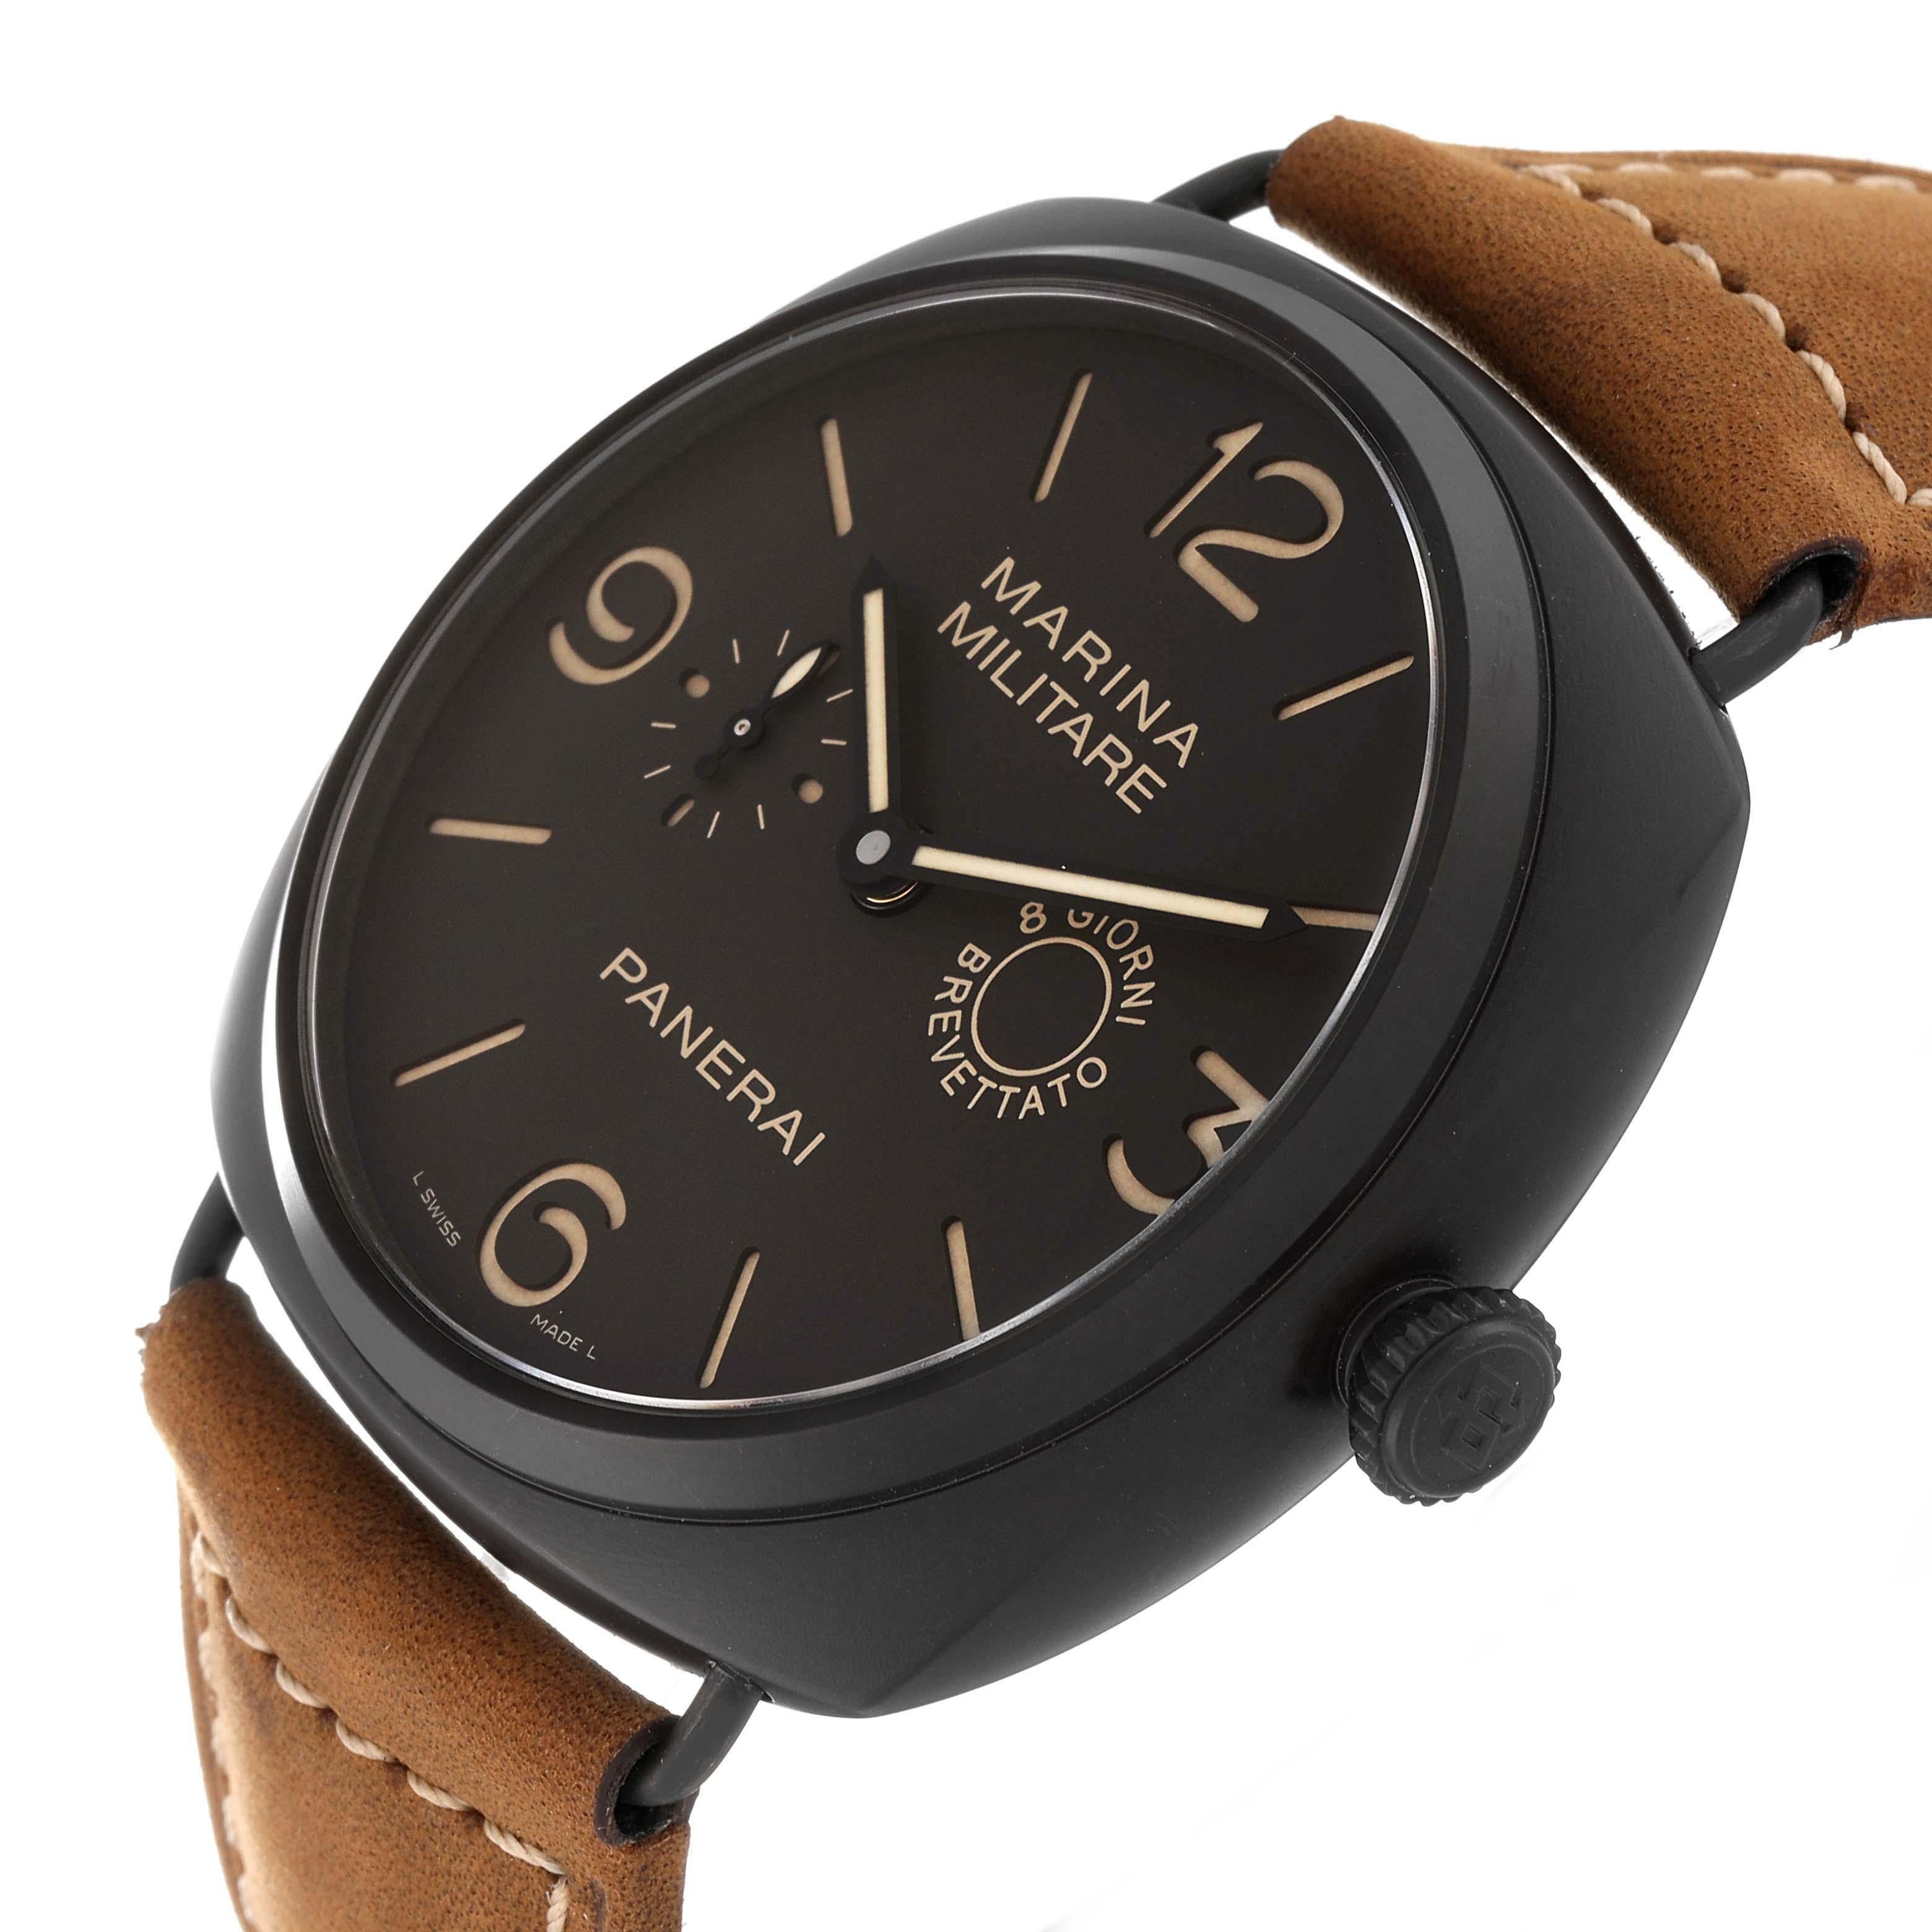 Panerai Radiomir Composite Marina Militare 8 Mens Watch PAM00339 Box Papers For Sale 1